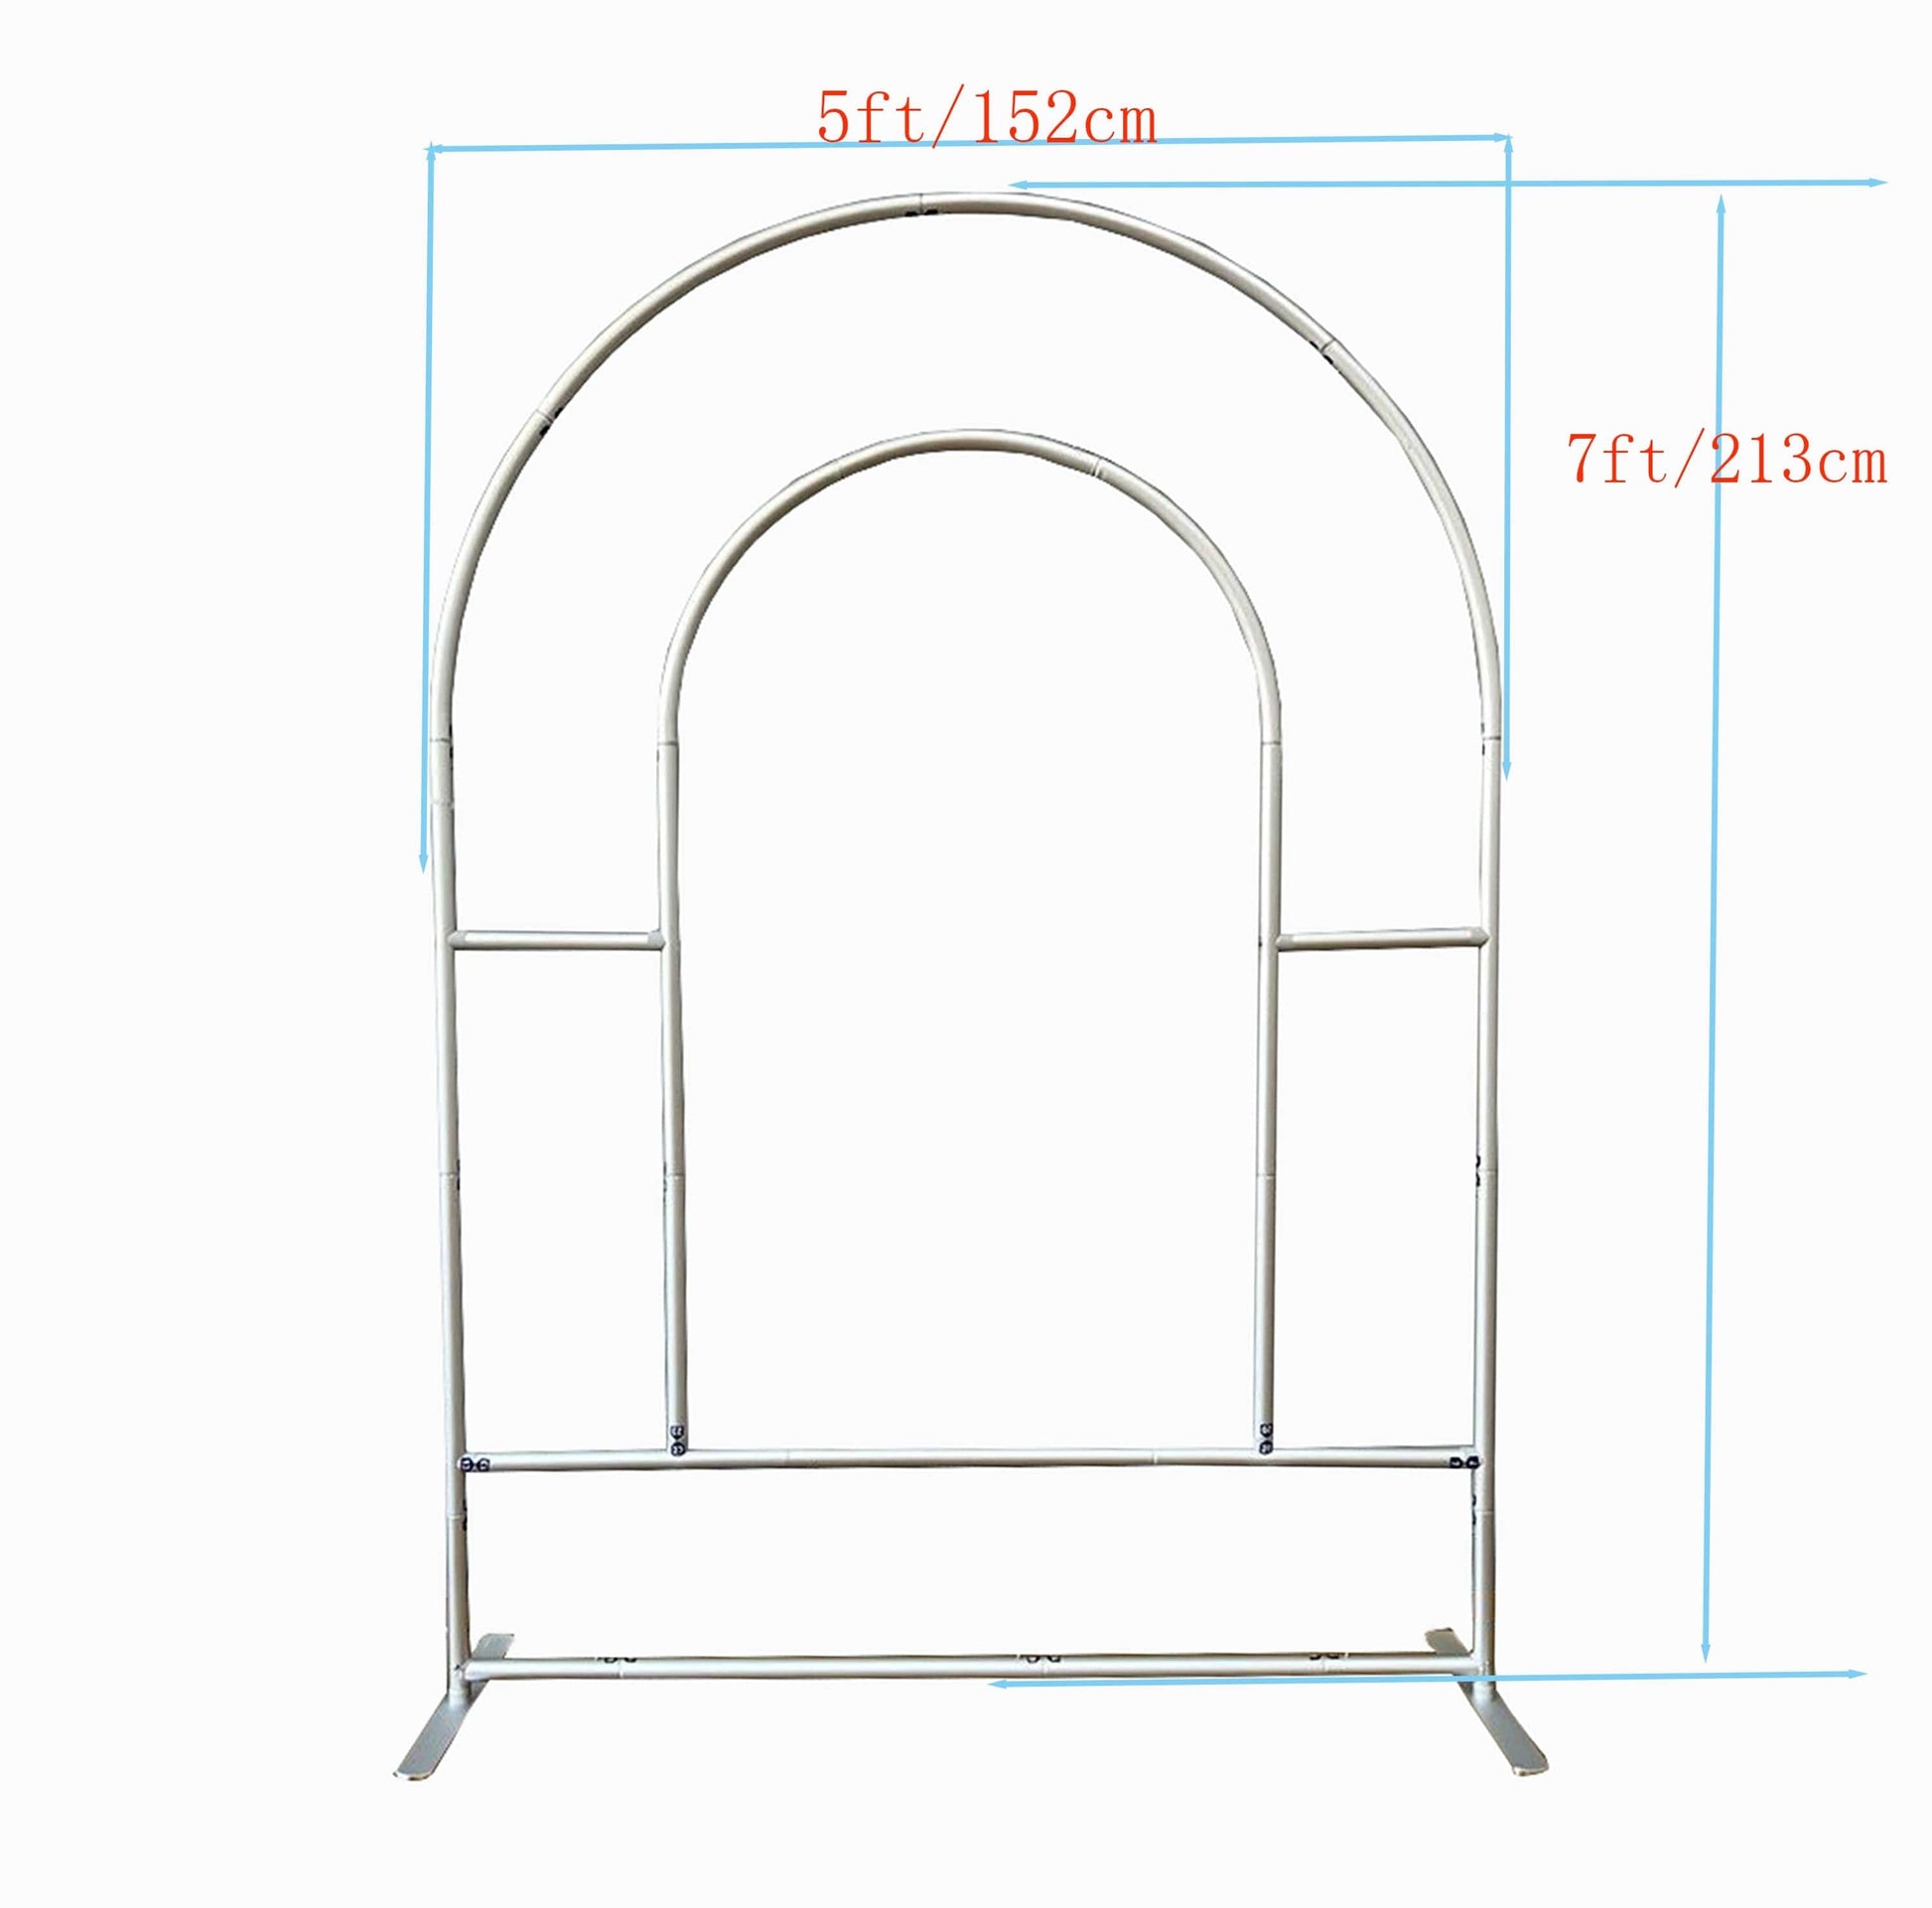 Portable Arch with cover – WeddingStory Shop